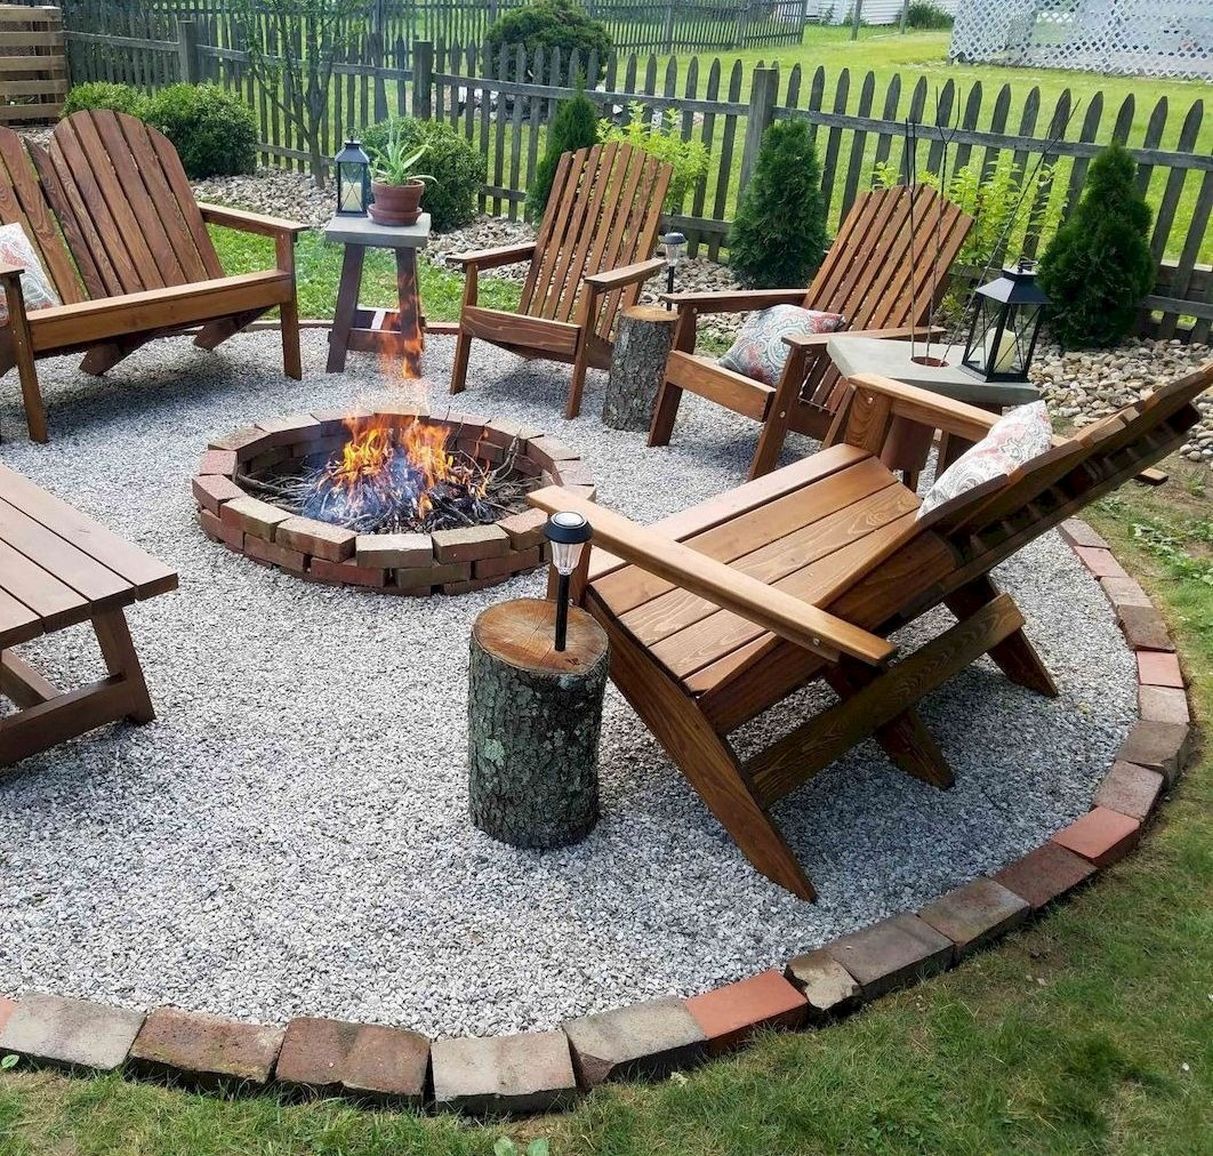 ð 24 Backyard Fire Pit Ideas Landscaping Create A Relaxing Retreat With ...